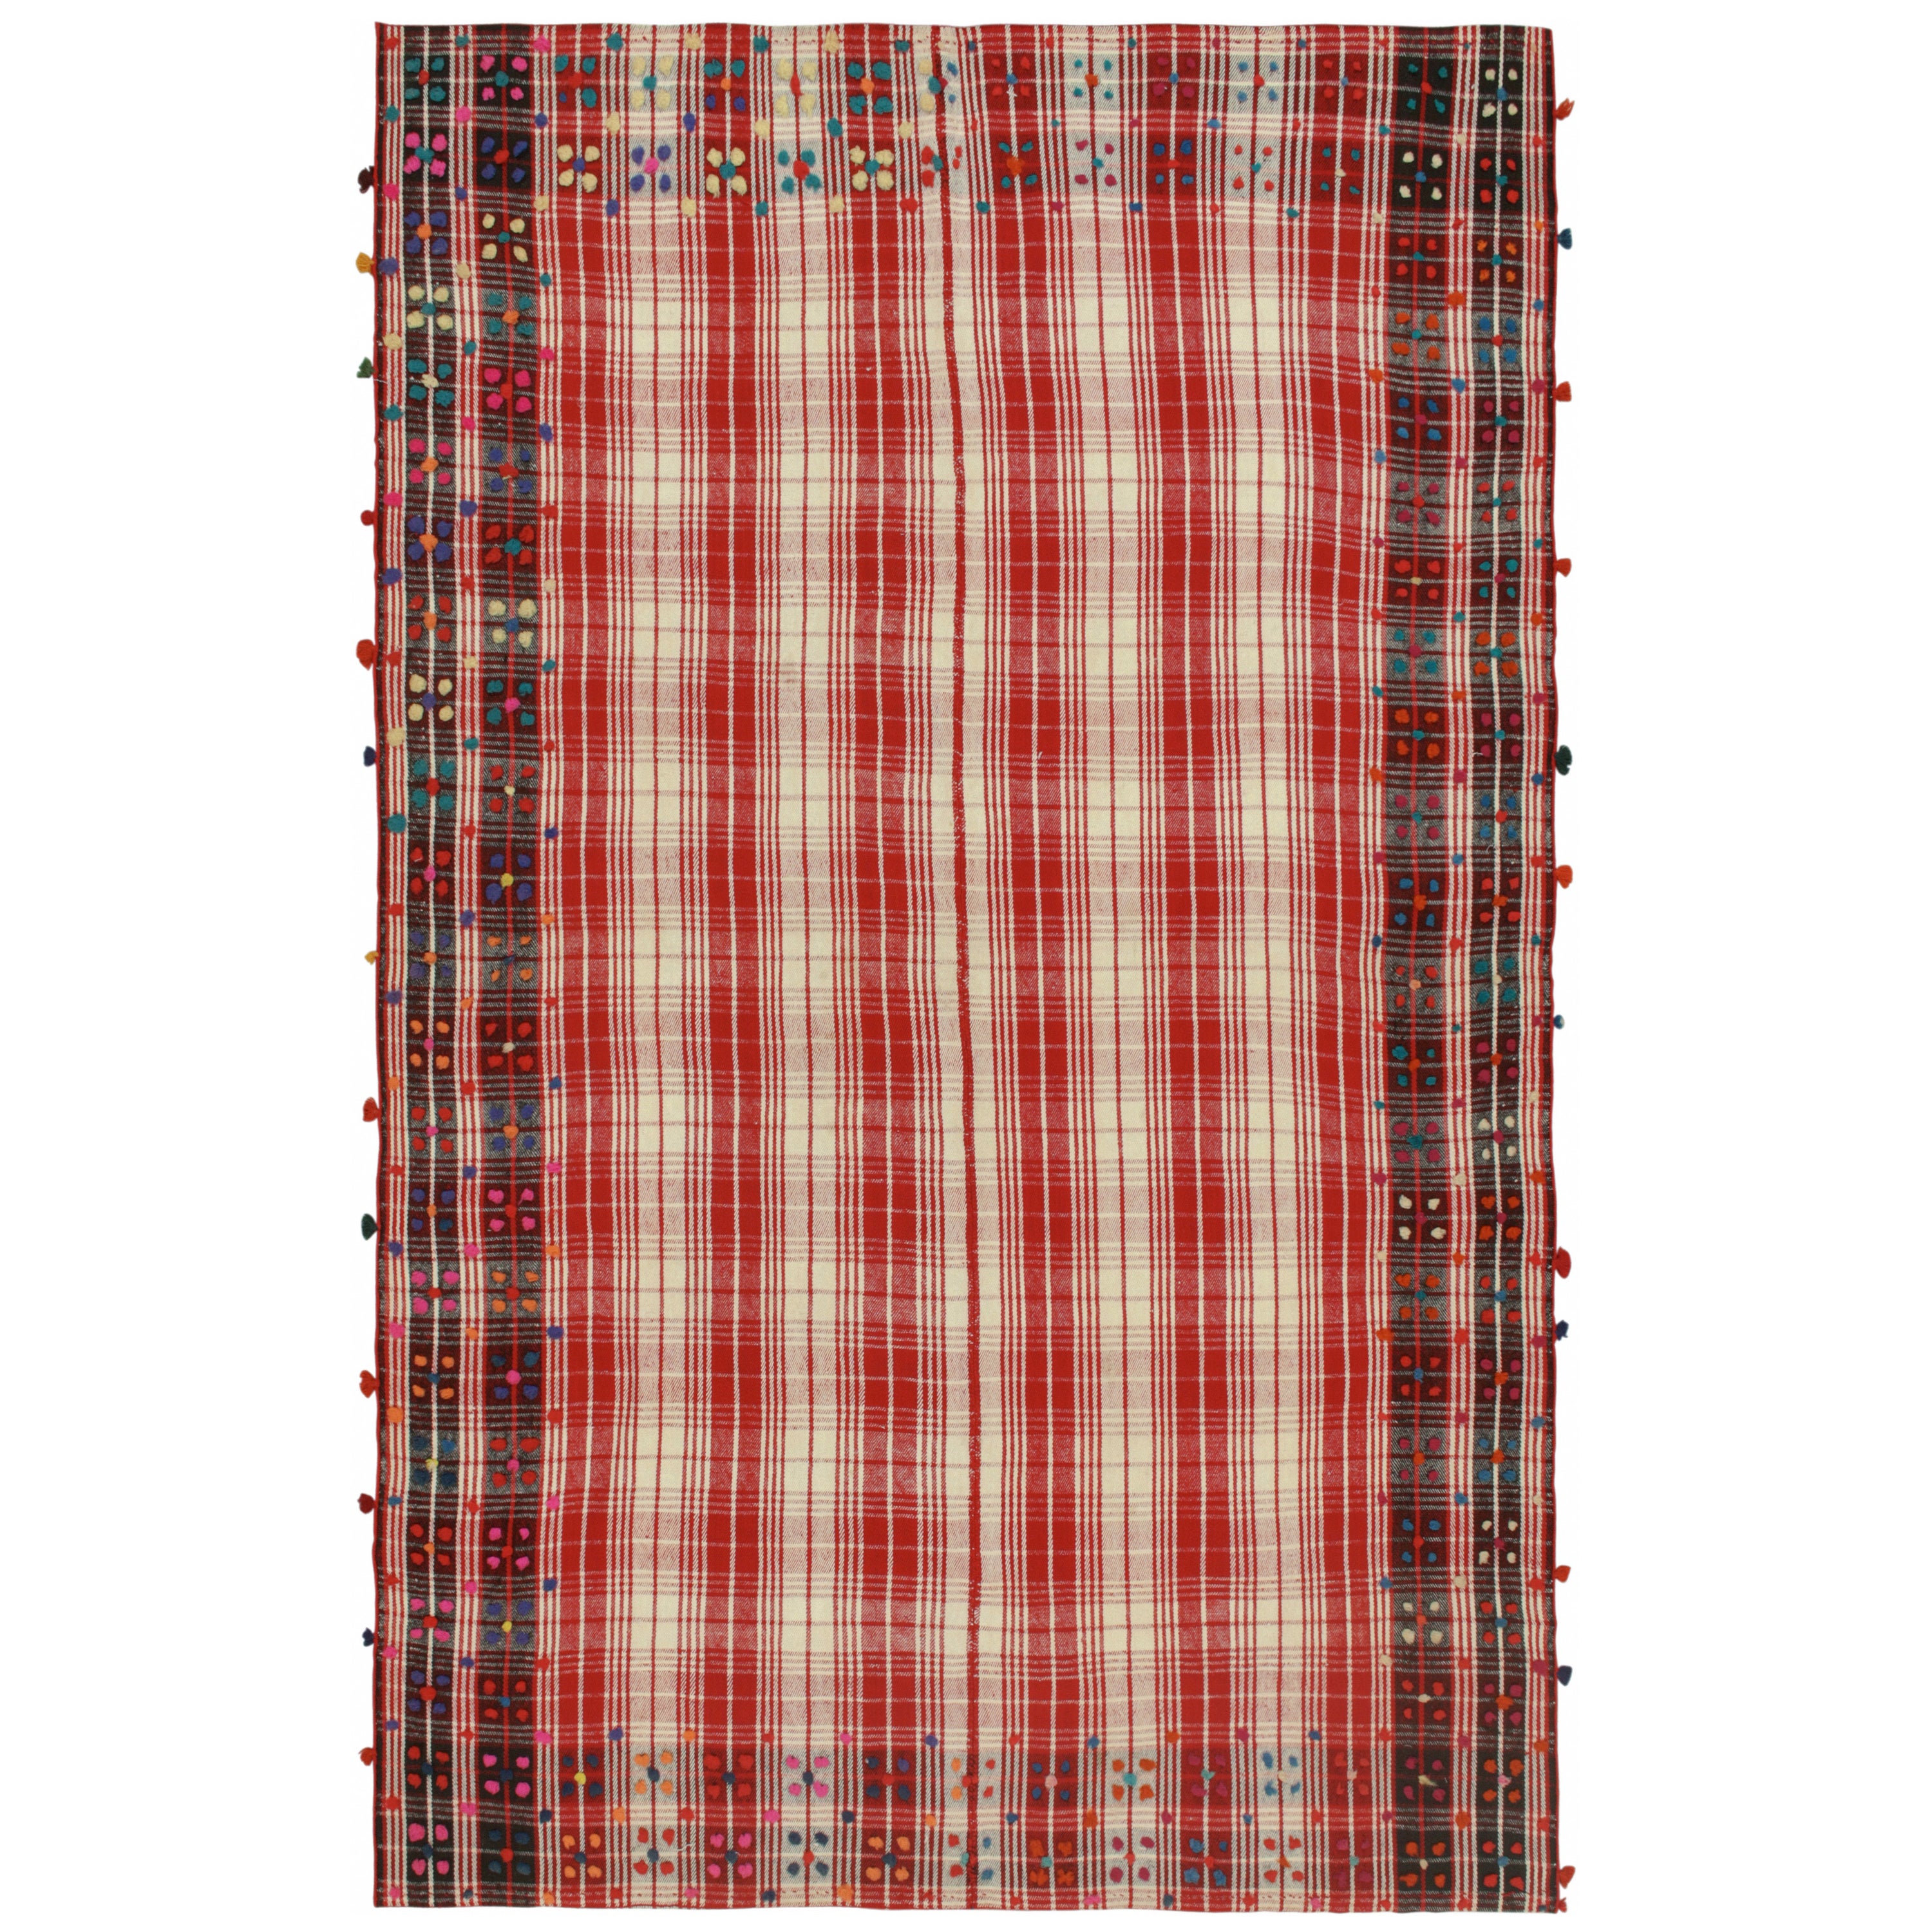 Vintage Persian Kilim in Red and White Plaid Geometric Pattern by Rug & Kilim